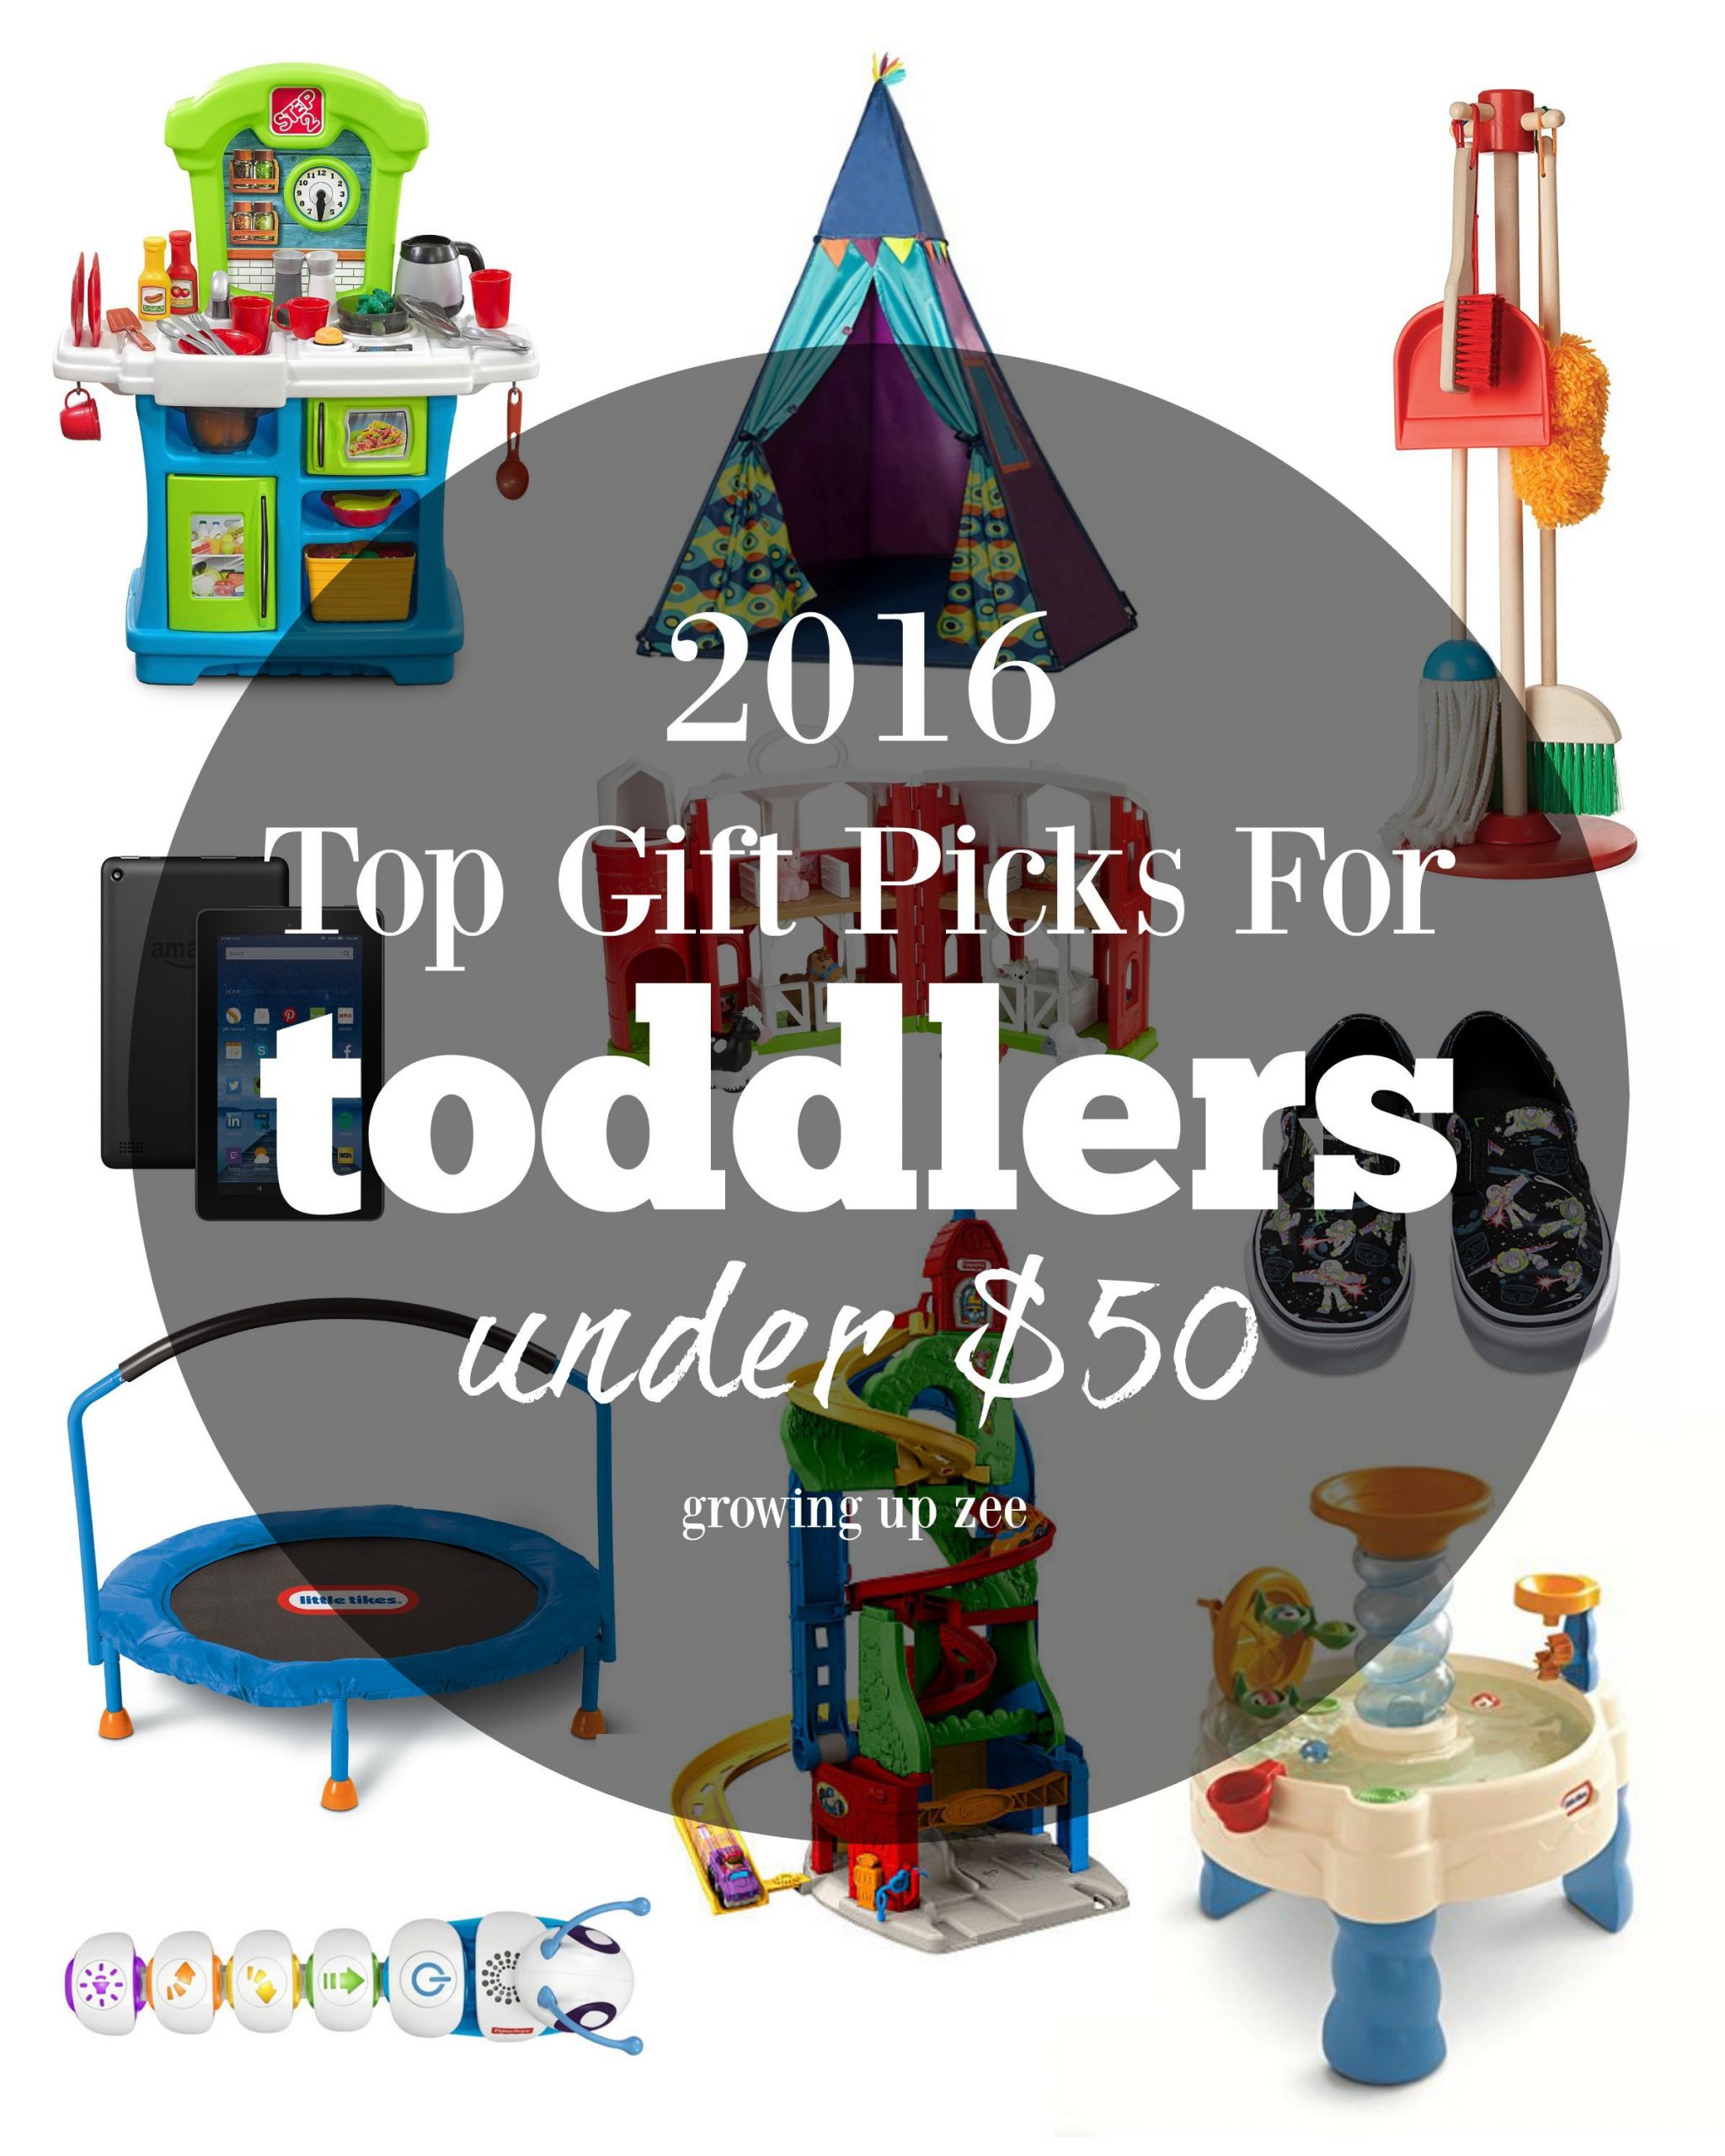 Christmas Gift Ideas For Couples Under 50
 2016 Top Gifts for Toddlers Under $50